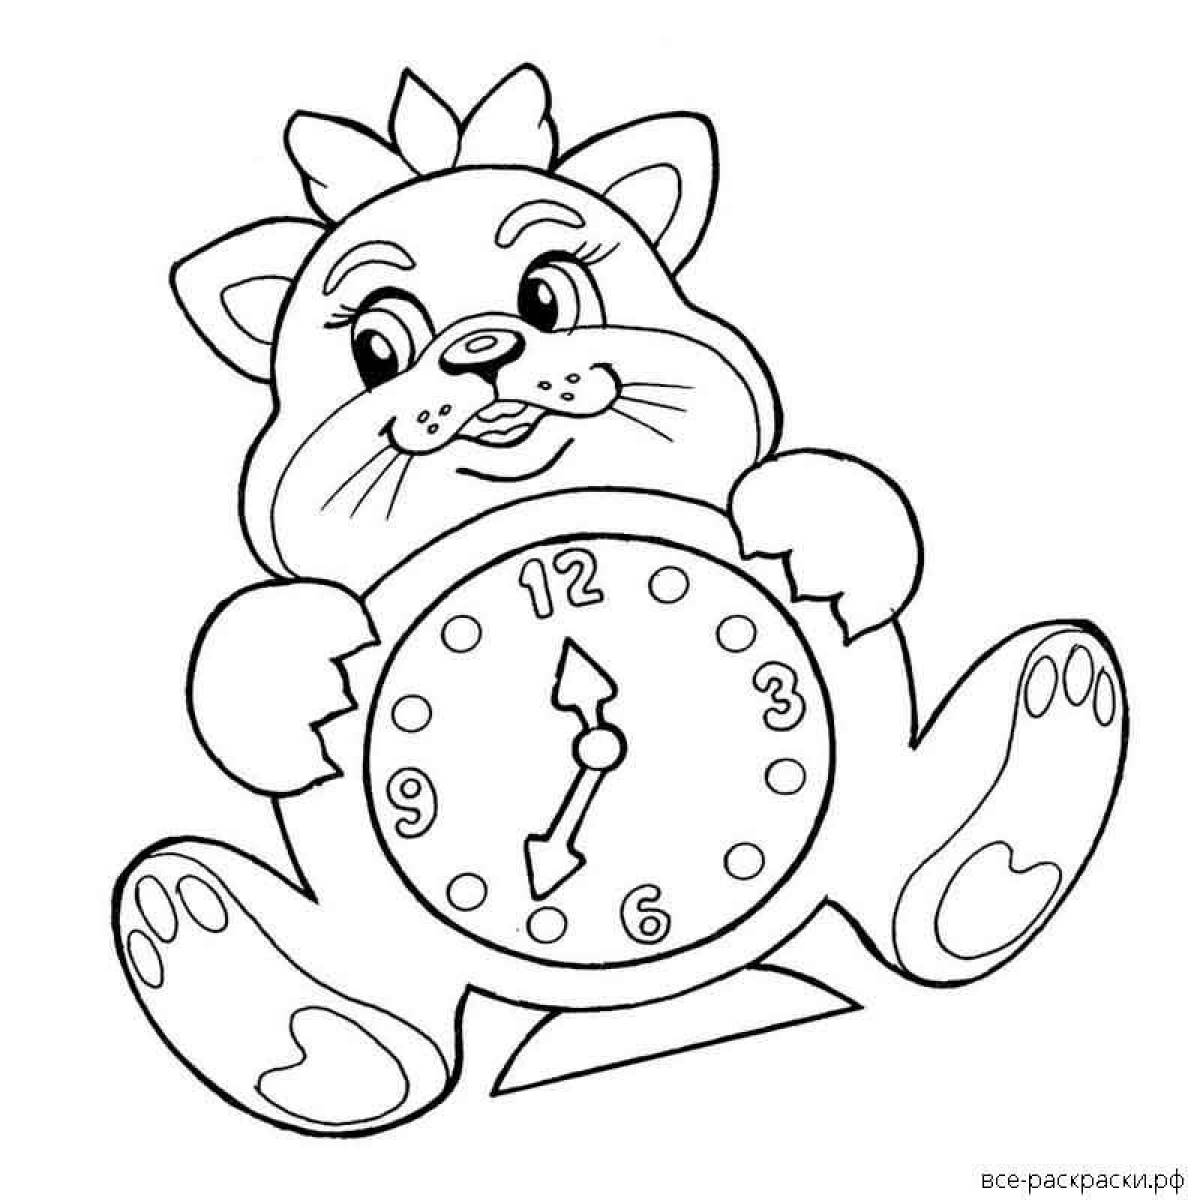 Creative coloring clock for kids